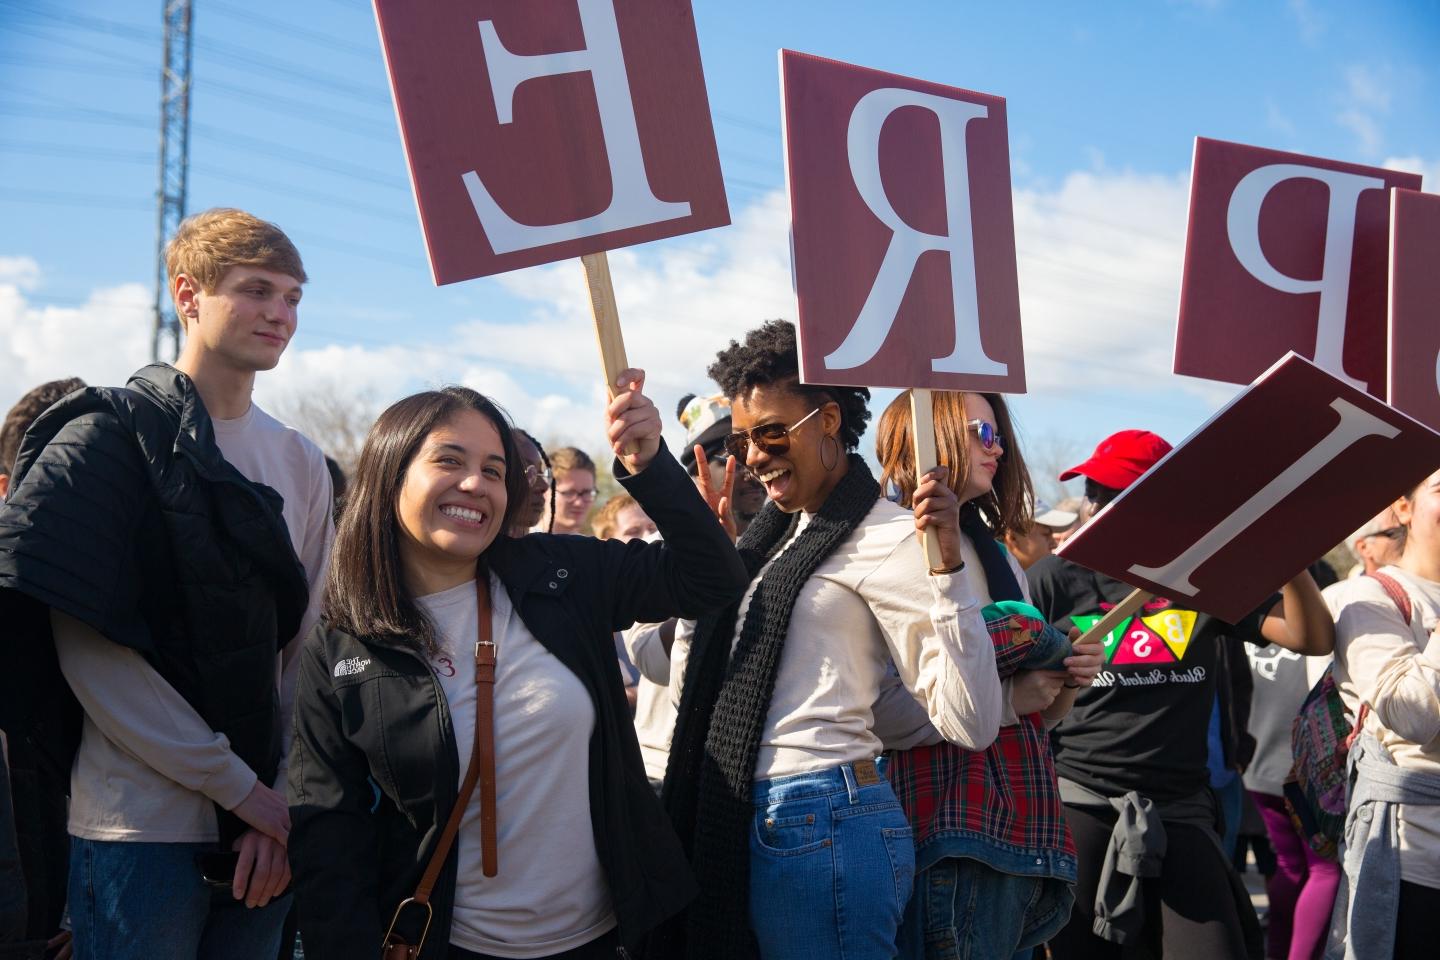 students hold signs that say "INSPIRE" at the Martin Luther King Jr. March